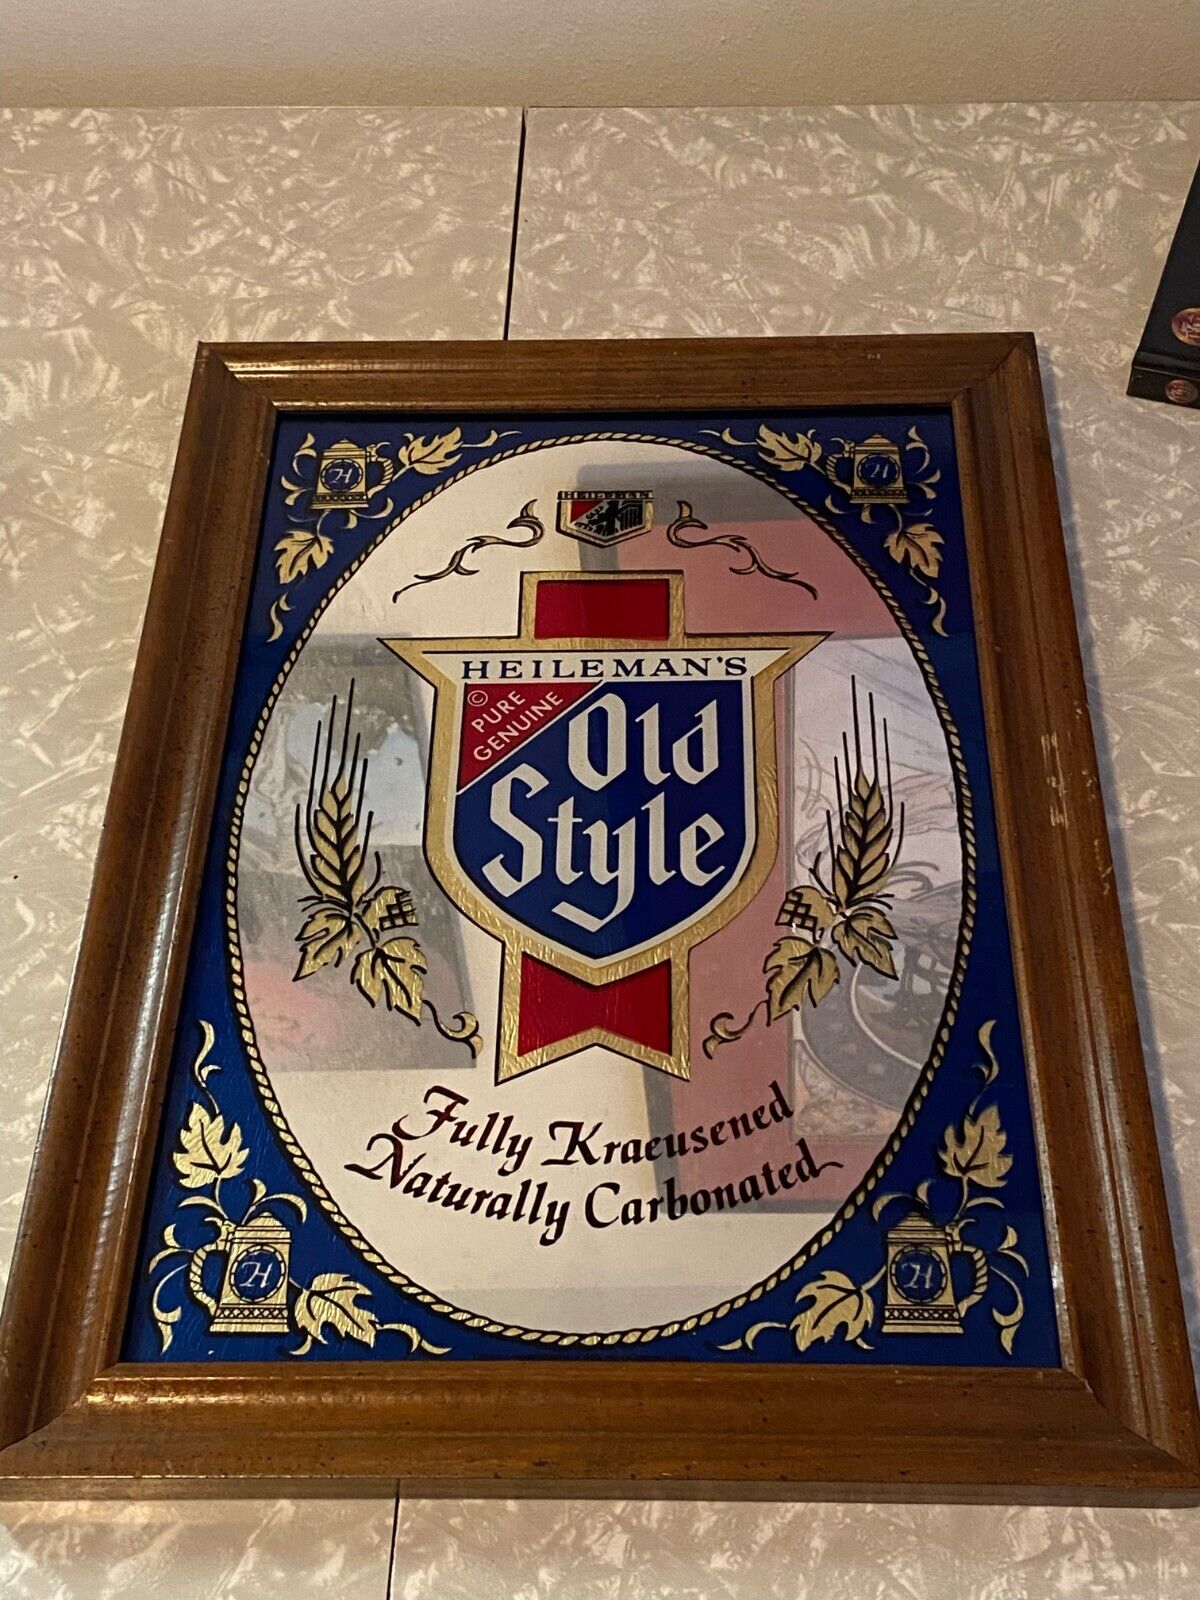 Vintage 1980 Heileman’s Old Style Beer Mirrored Framed Bar Sign 20x14.5”